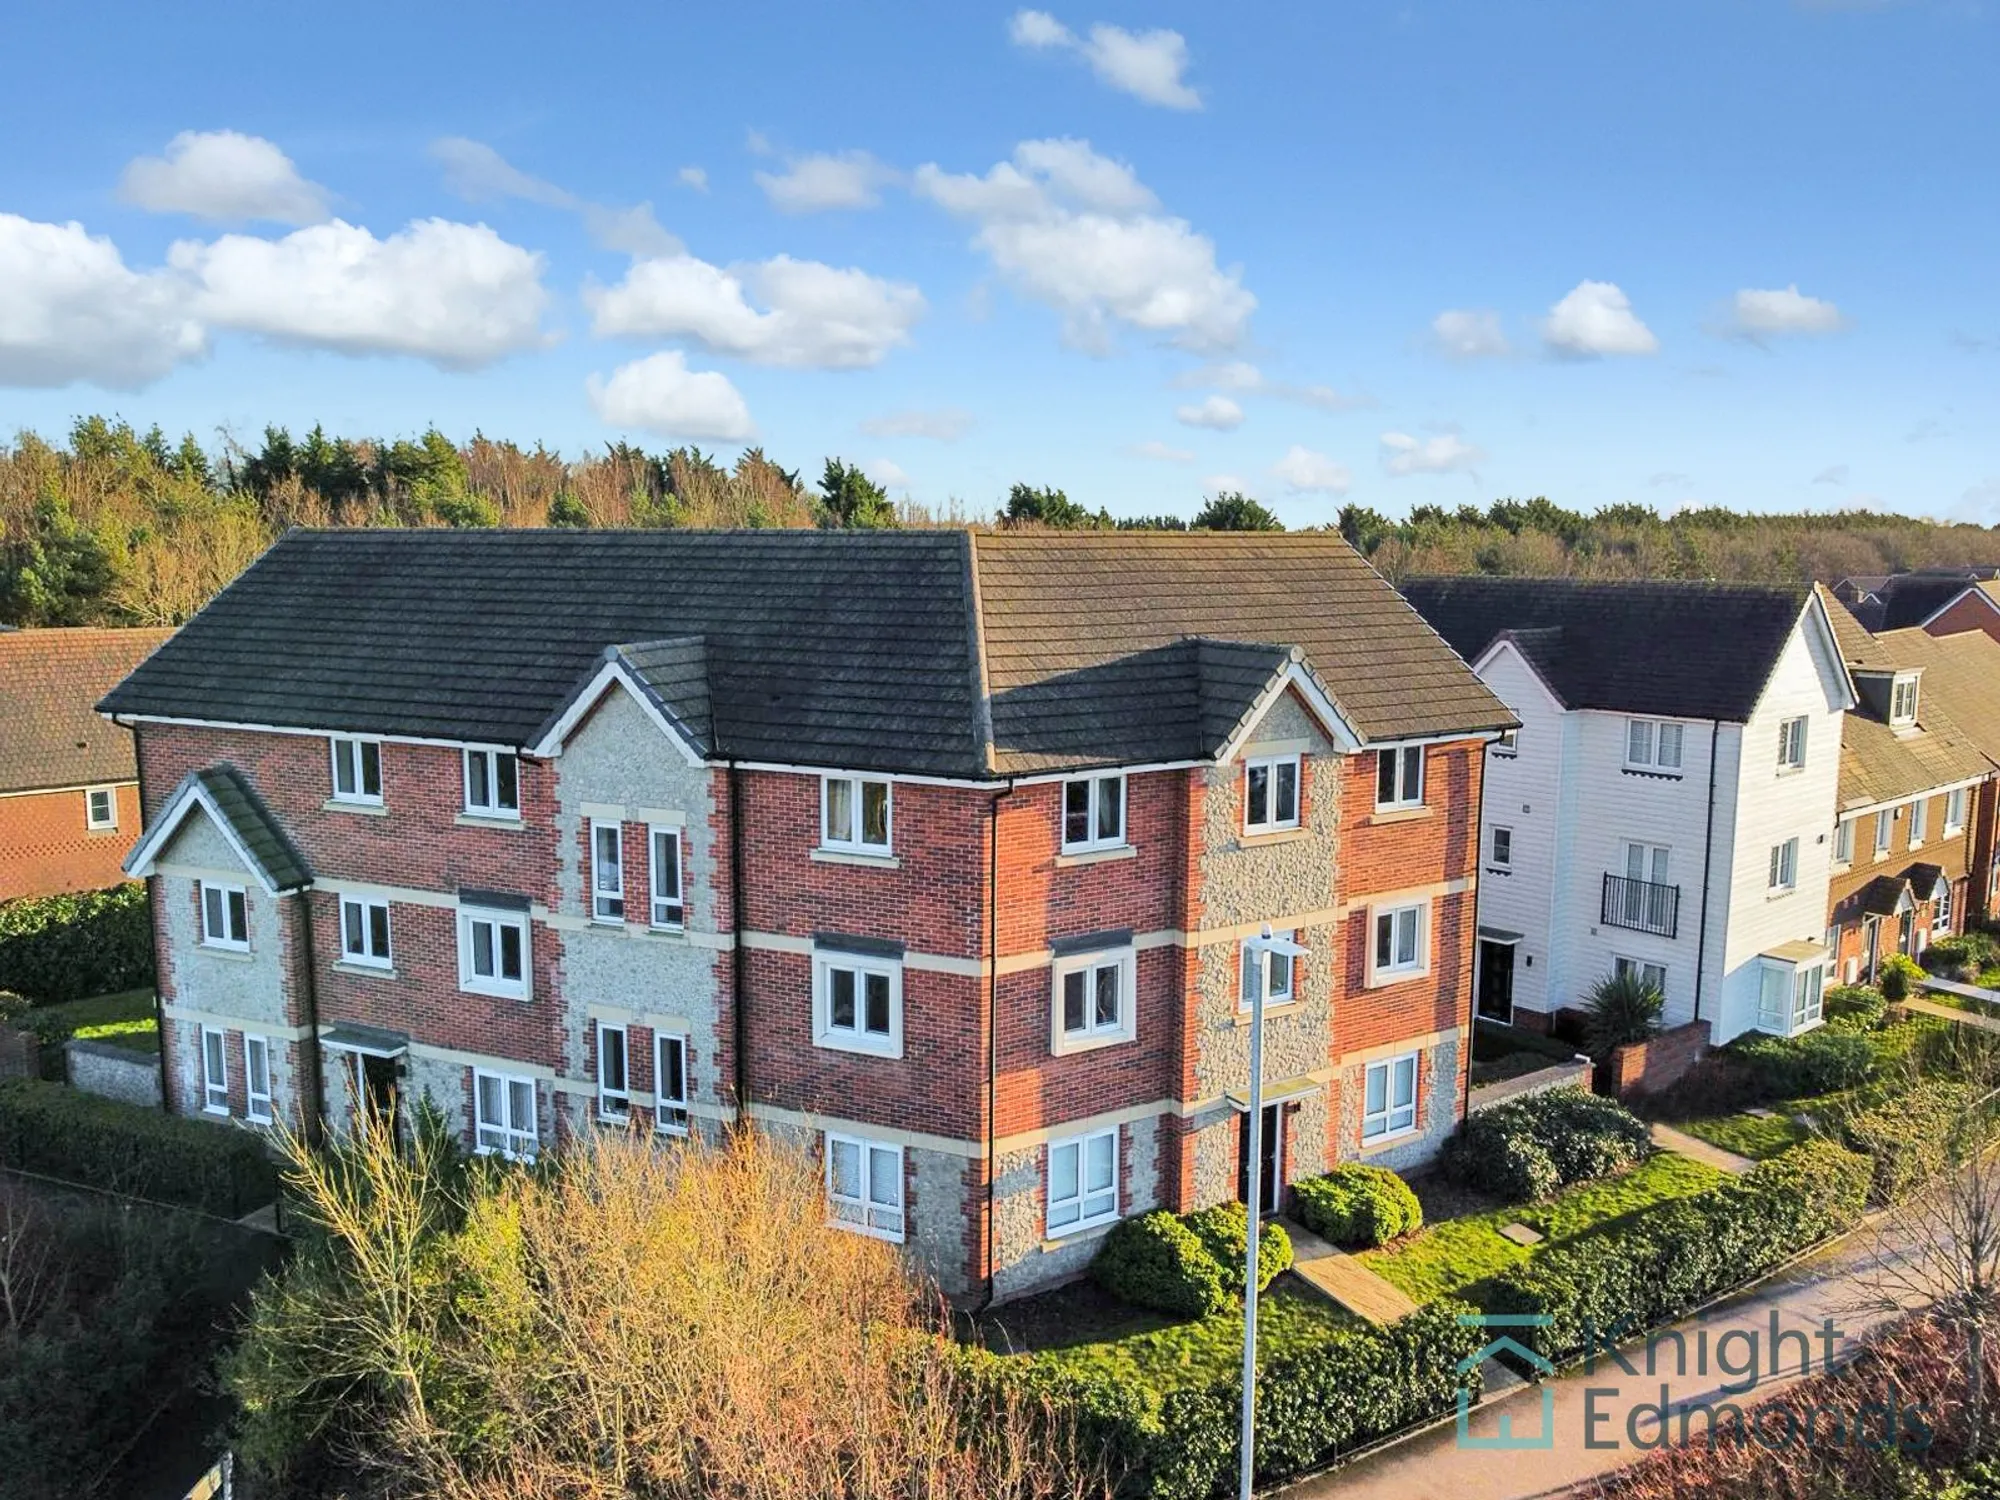 2 bed apartment for sale in Edmett Way, Maidstone - Property Image 1